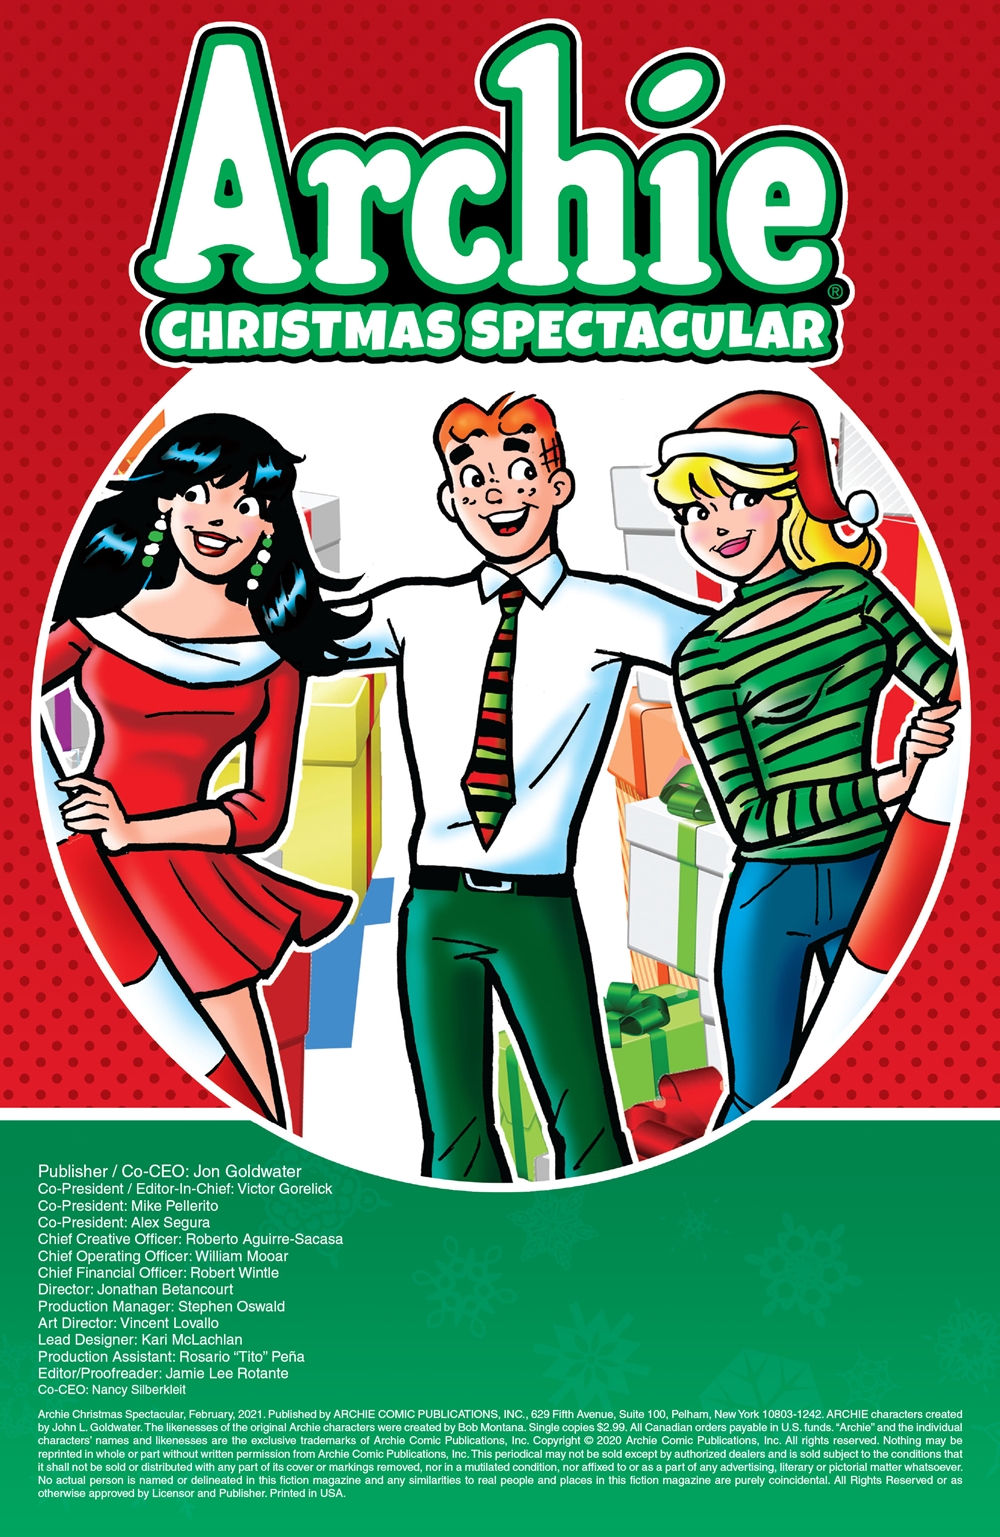 Archie%2527s%2BChristmas%2BSpectacular%2B2020%2B001-001